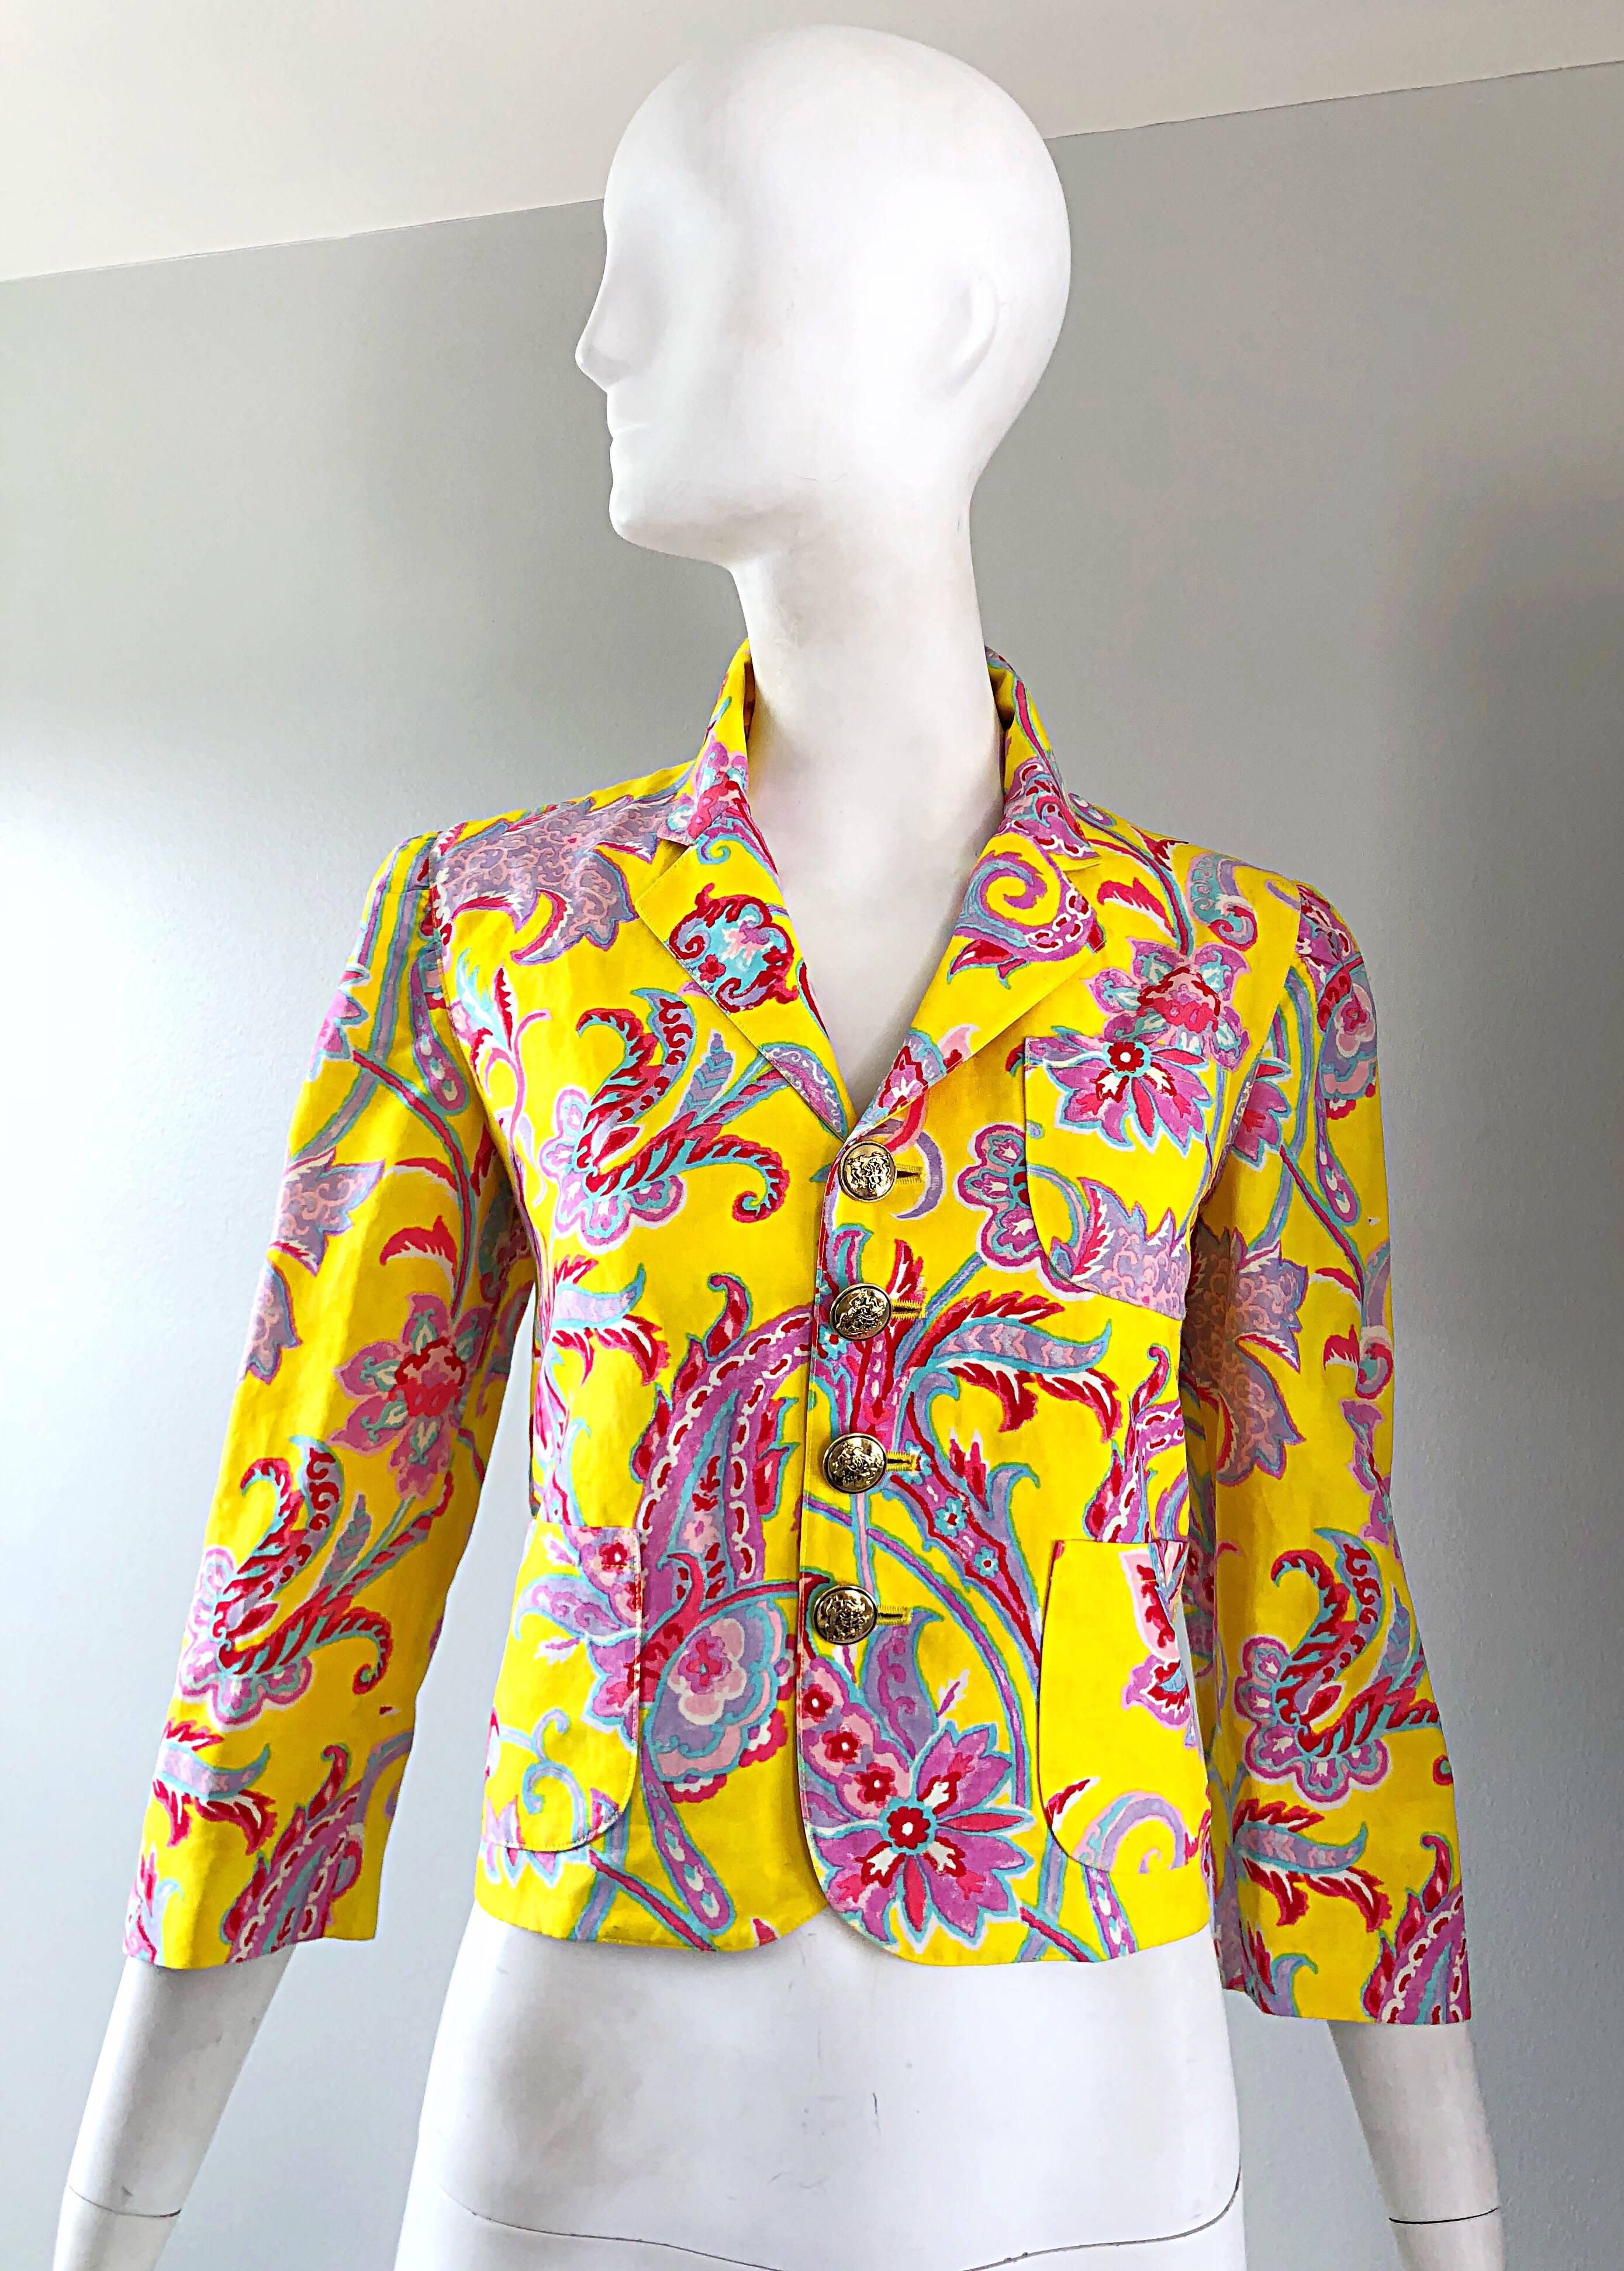 Amazing 1990s vintage RALPH LAUREN Purple Label canary yellow and pink paisley print 3/4 sleeves cropped jacket! Vibrant yellow backdrop, with pink, purple, blue and white paisley prints throughout. Lightweight soft linen and cotton blend makes for